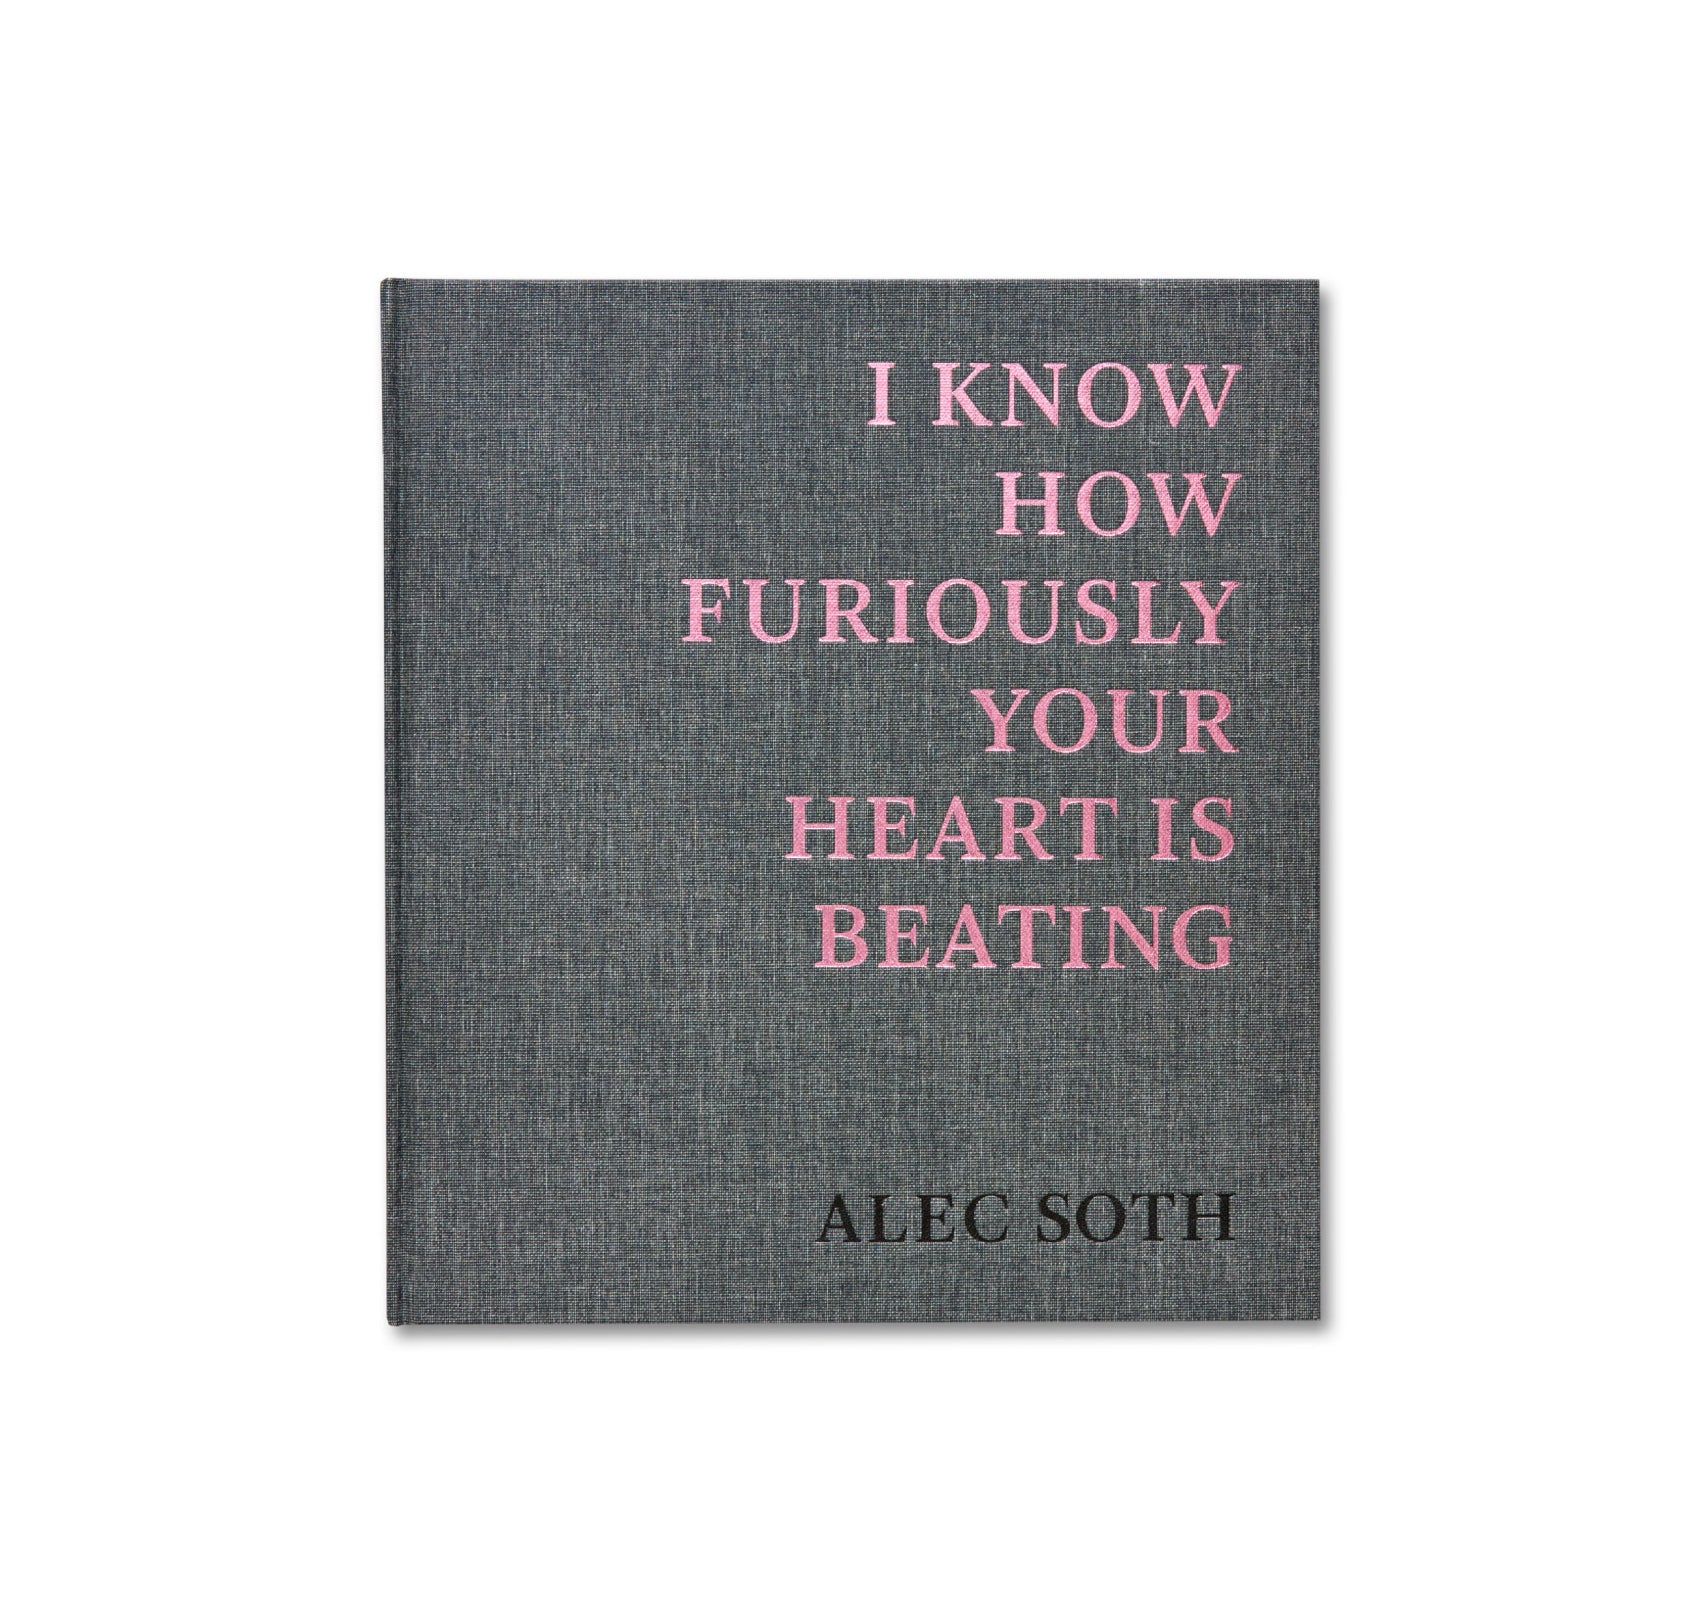 I KNOW HOW FURIOUSLY YOUR HEART IS BEATING by Alec Soth [SPECIAL EDITION (A)]